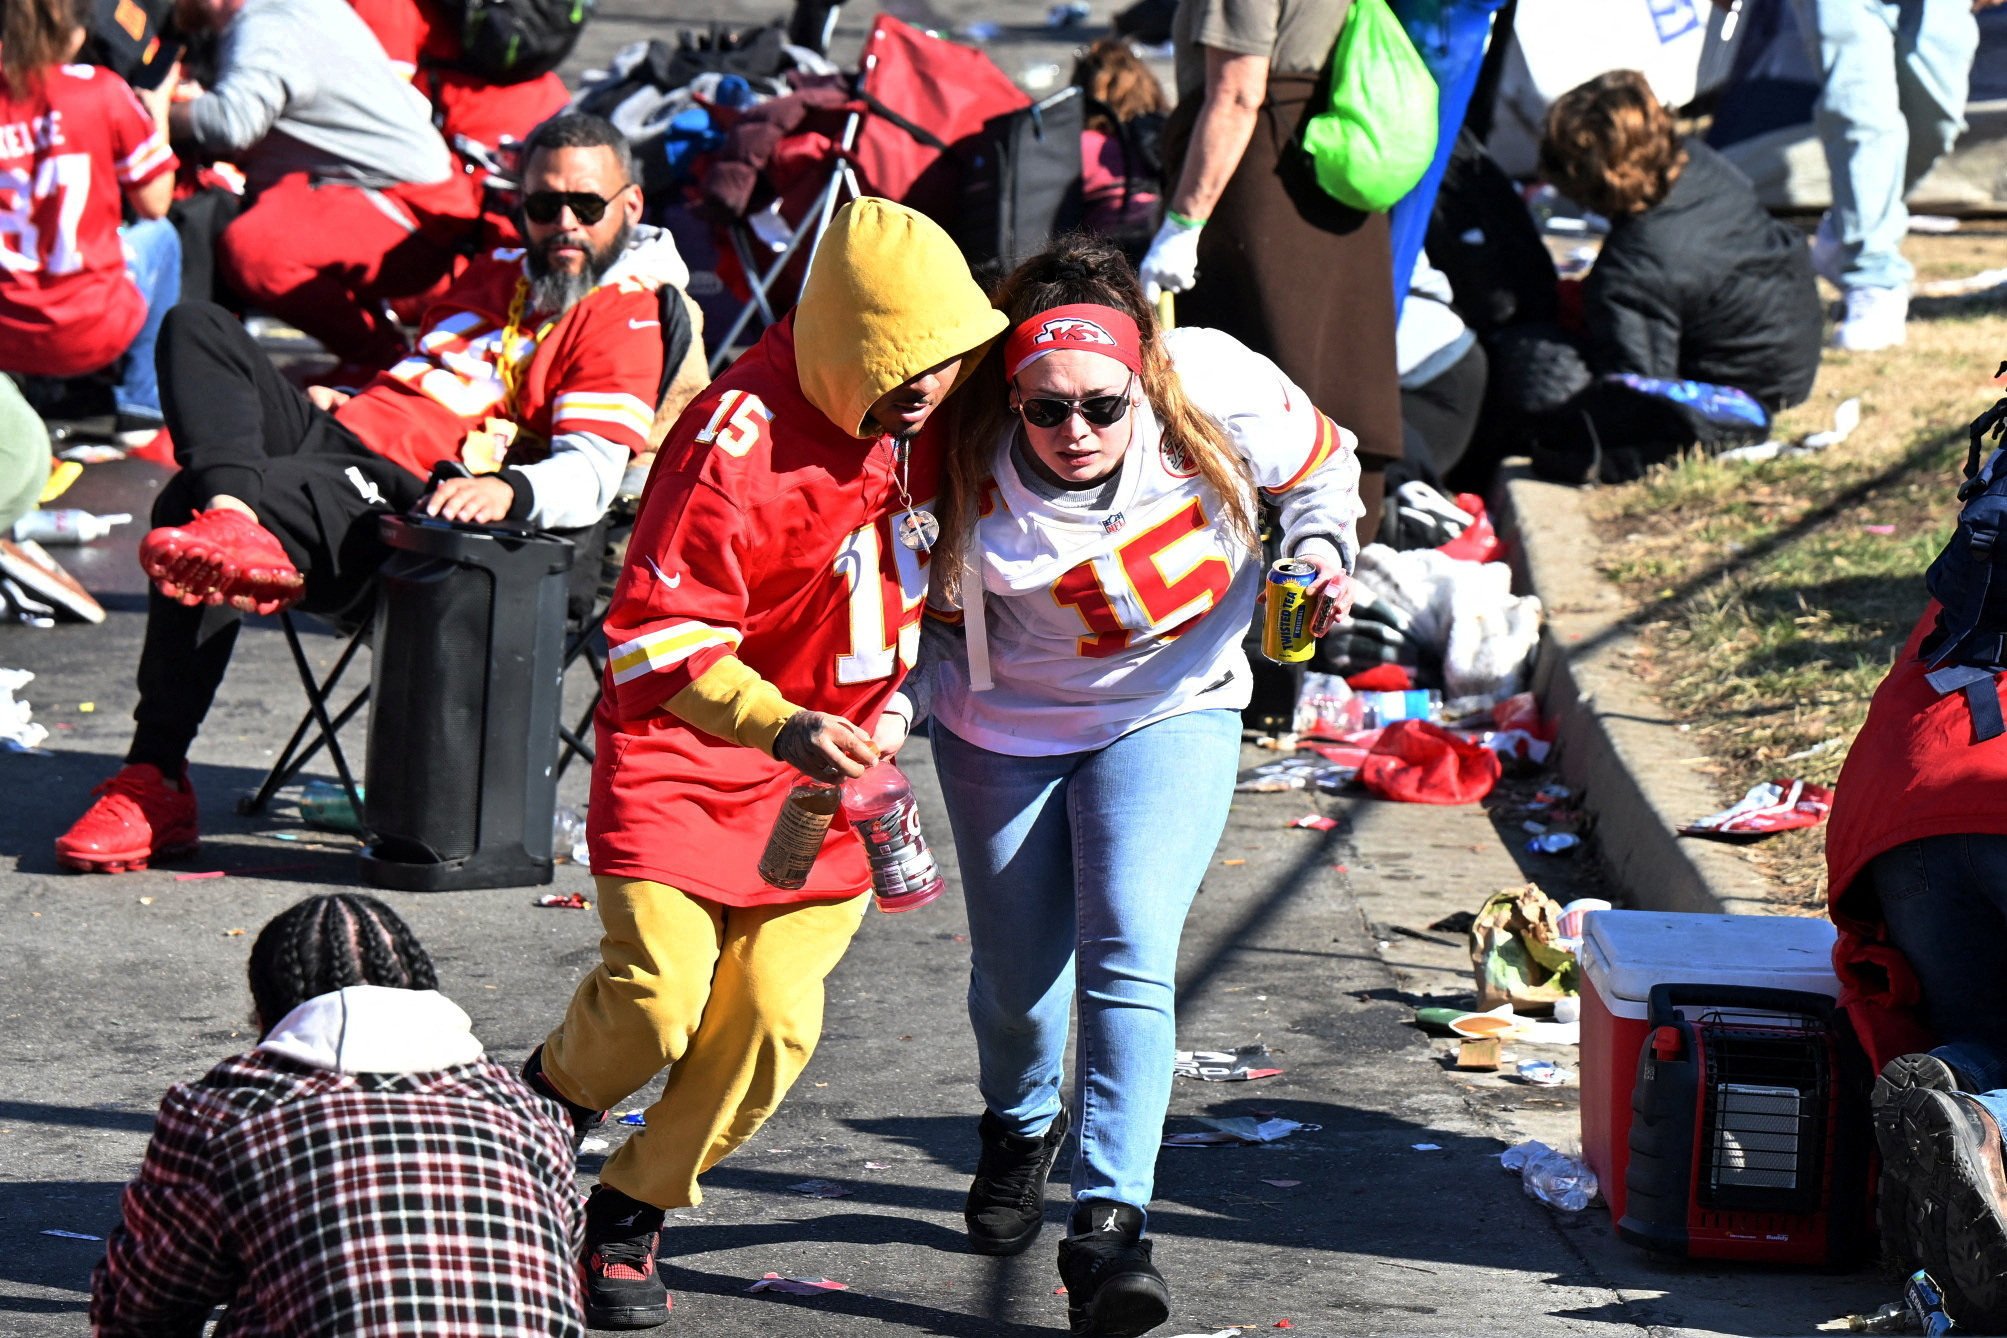 After shots rang out, shocked fans scrambled to flee to safety. Photo: David Rainey-USA TODAY Sports   